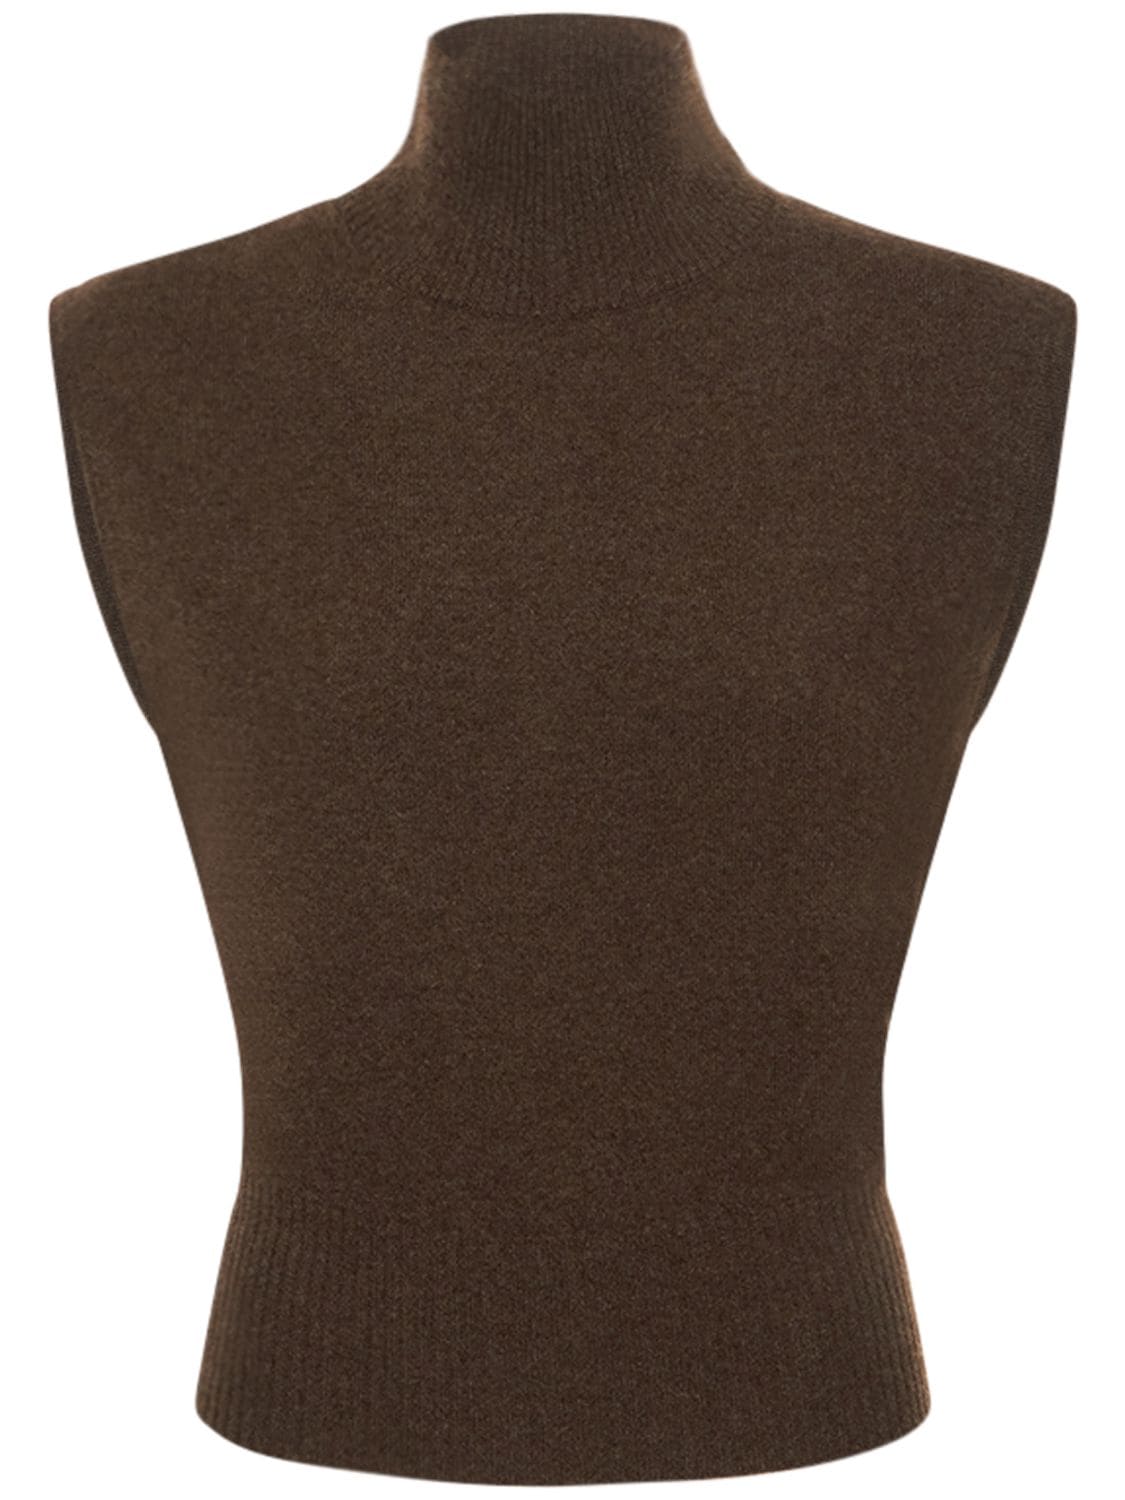 Image of Arco Cashmere Turtleneck Tank Top